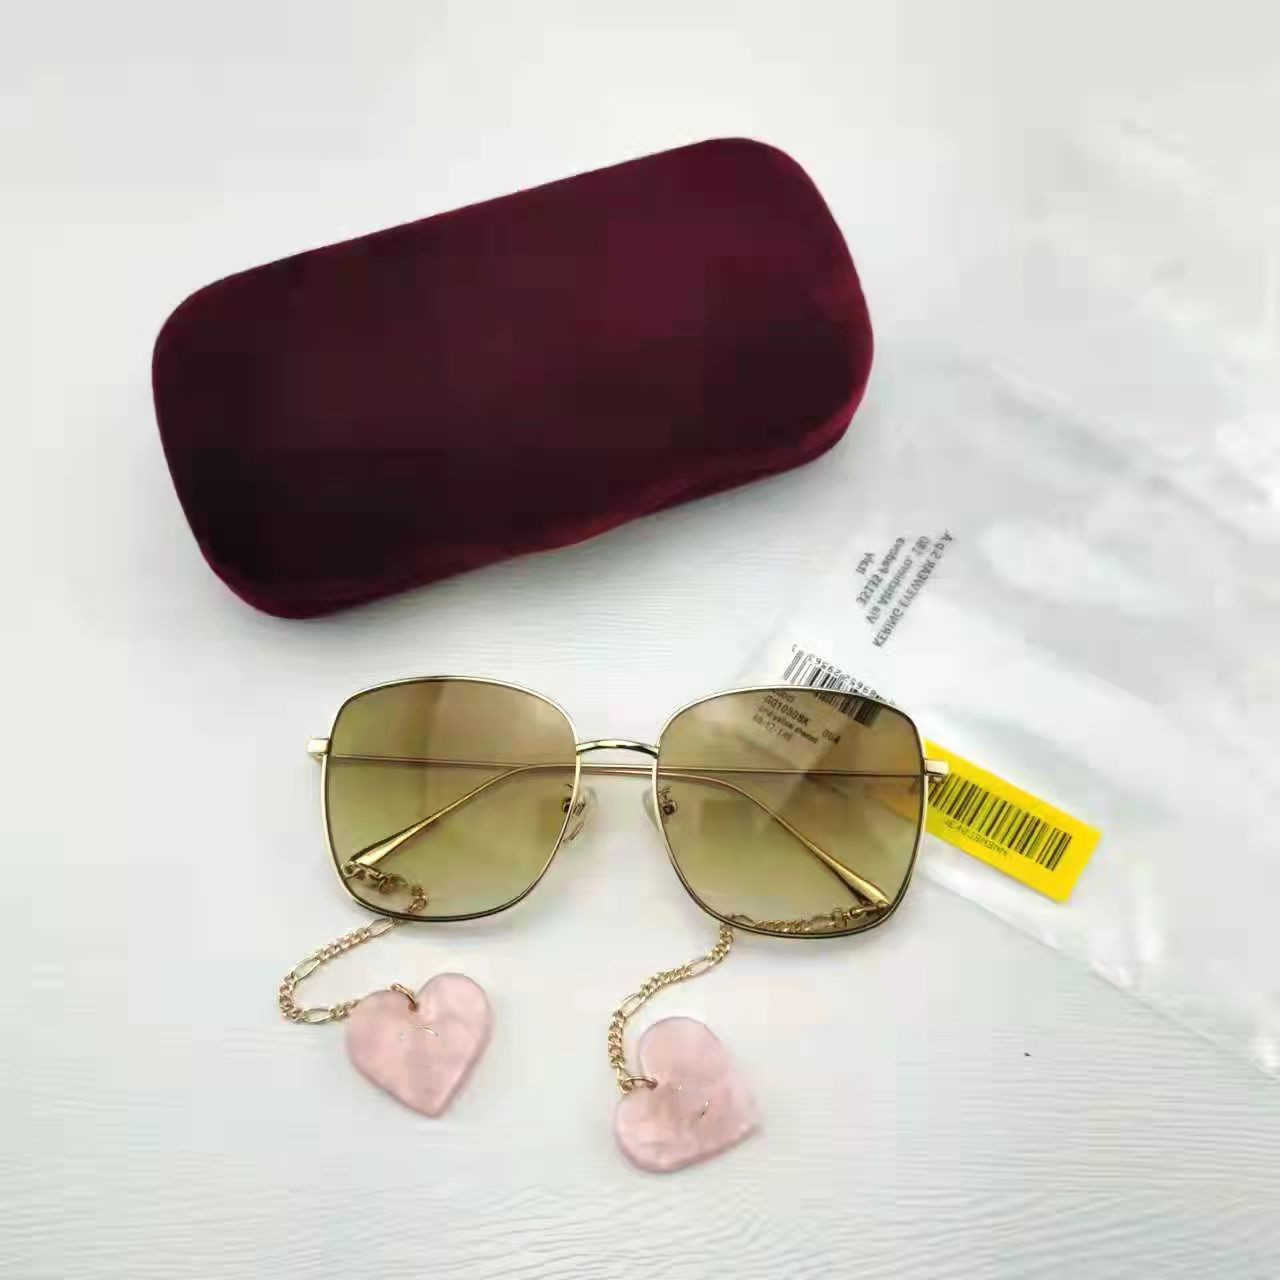 High quality fashionable sunglasses 10% OFF Luxury Designer New Men's and Women's Sunglasses 20% Off Ultra Light Full Frame GG1030S with Unique Pendant Style